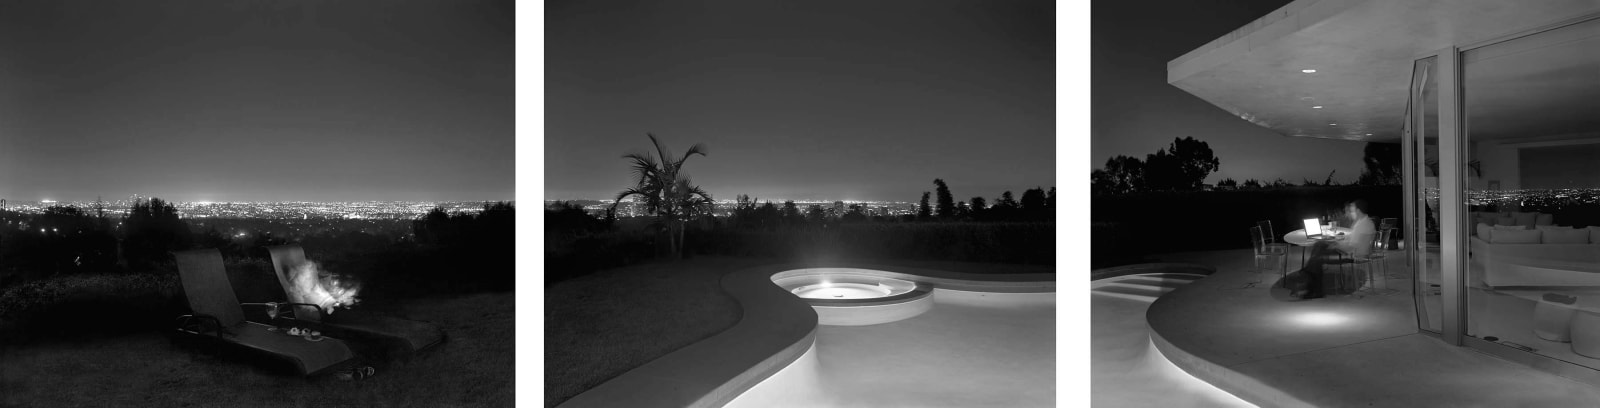 Calum and Eric watching Grey's Anatomy and playing Solitaire by their pool in California, long exposure made at night, by Matthew Pillsbury